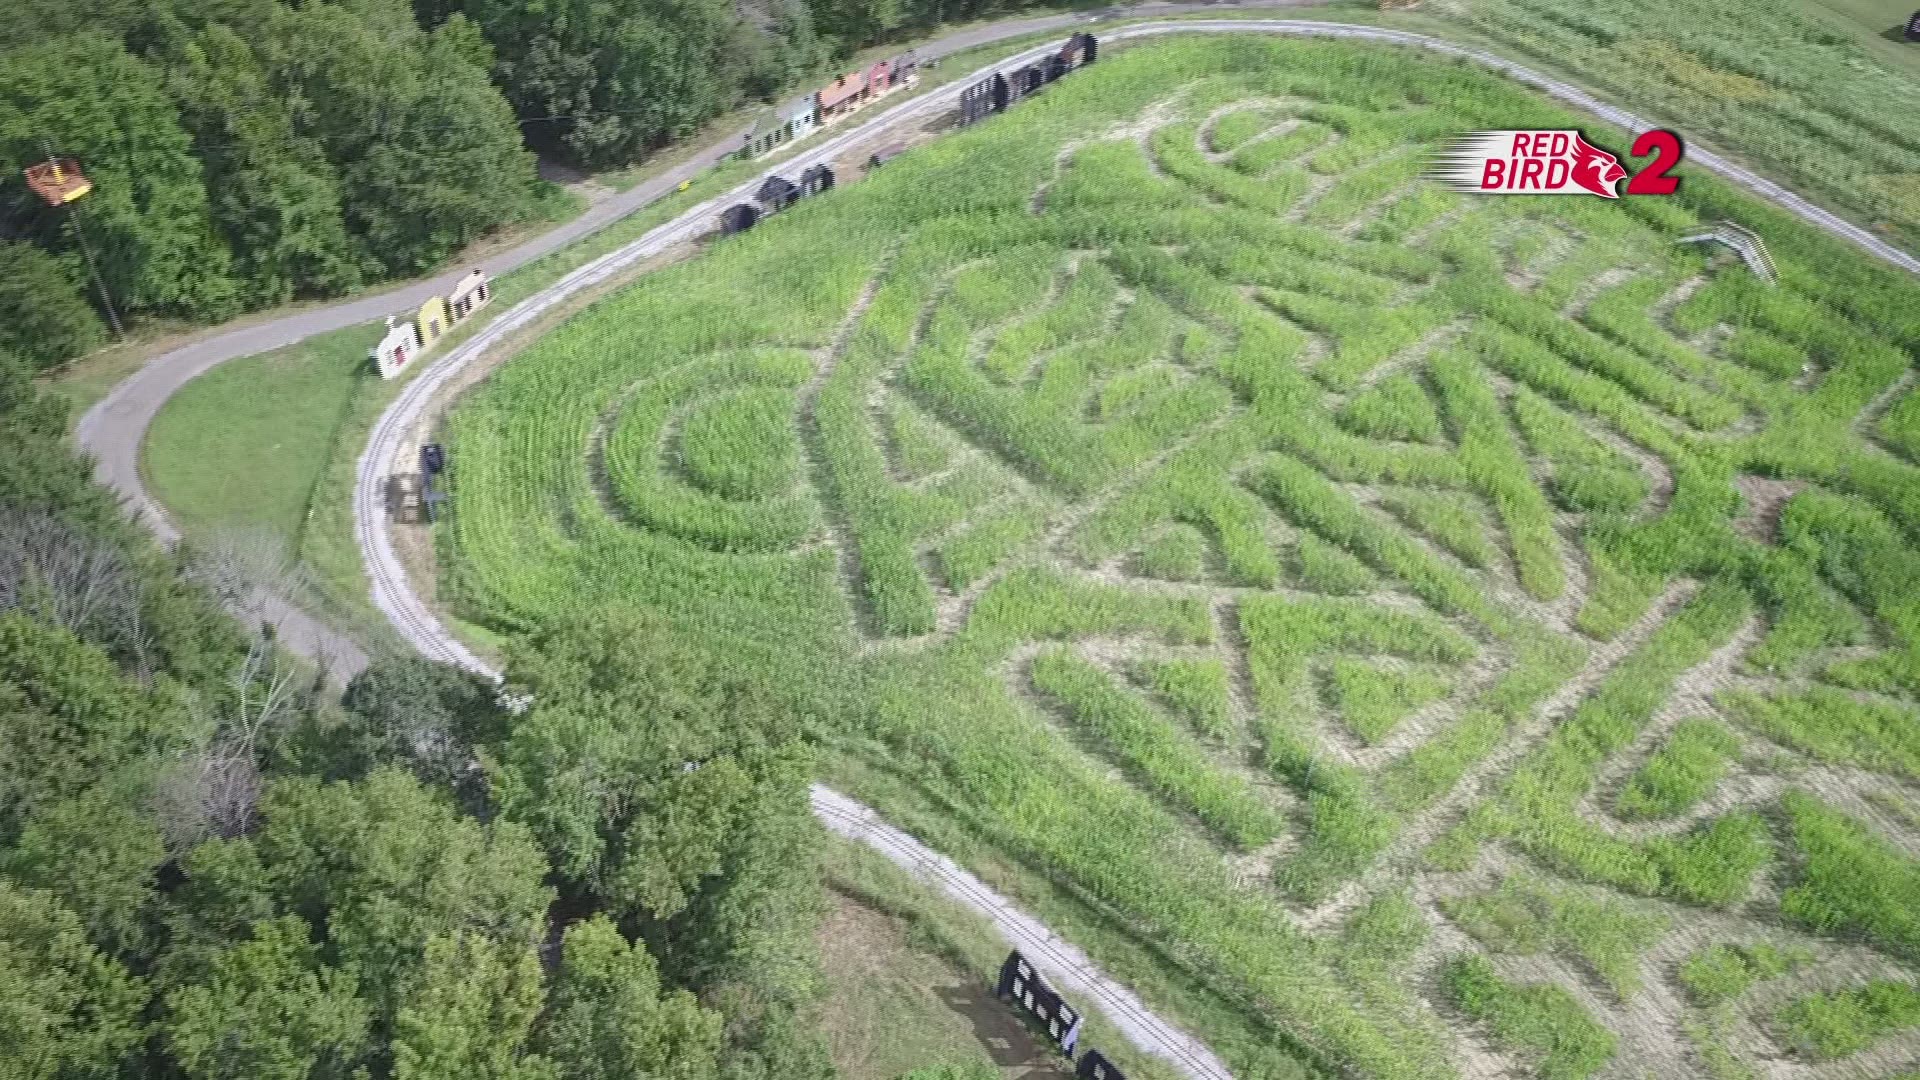 Check out the corn maze at Kersey Valley!